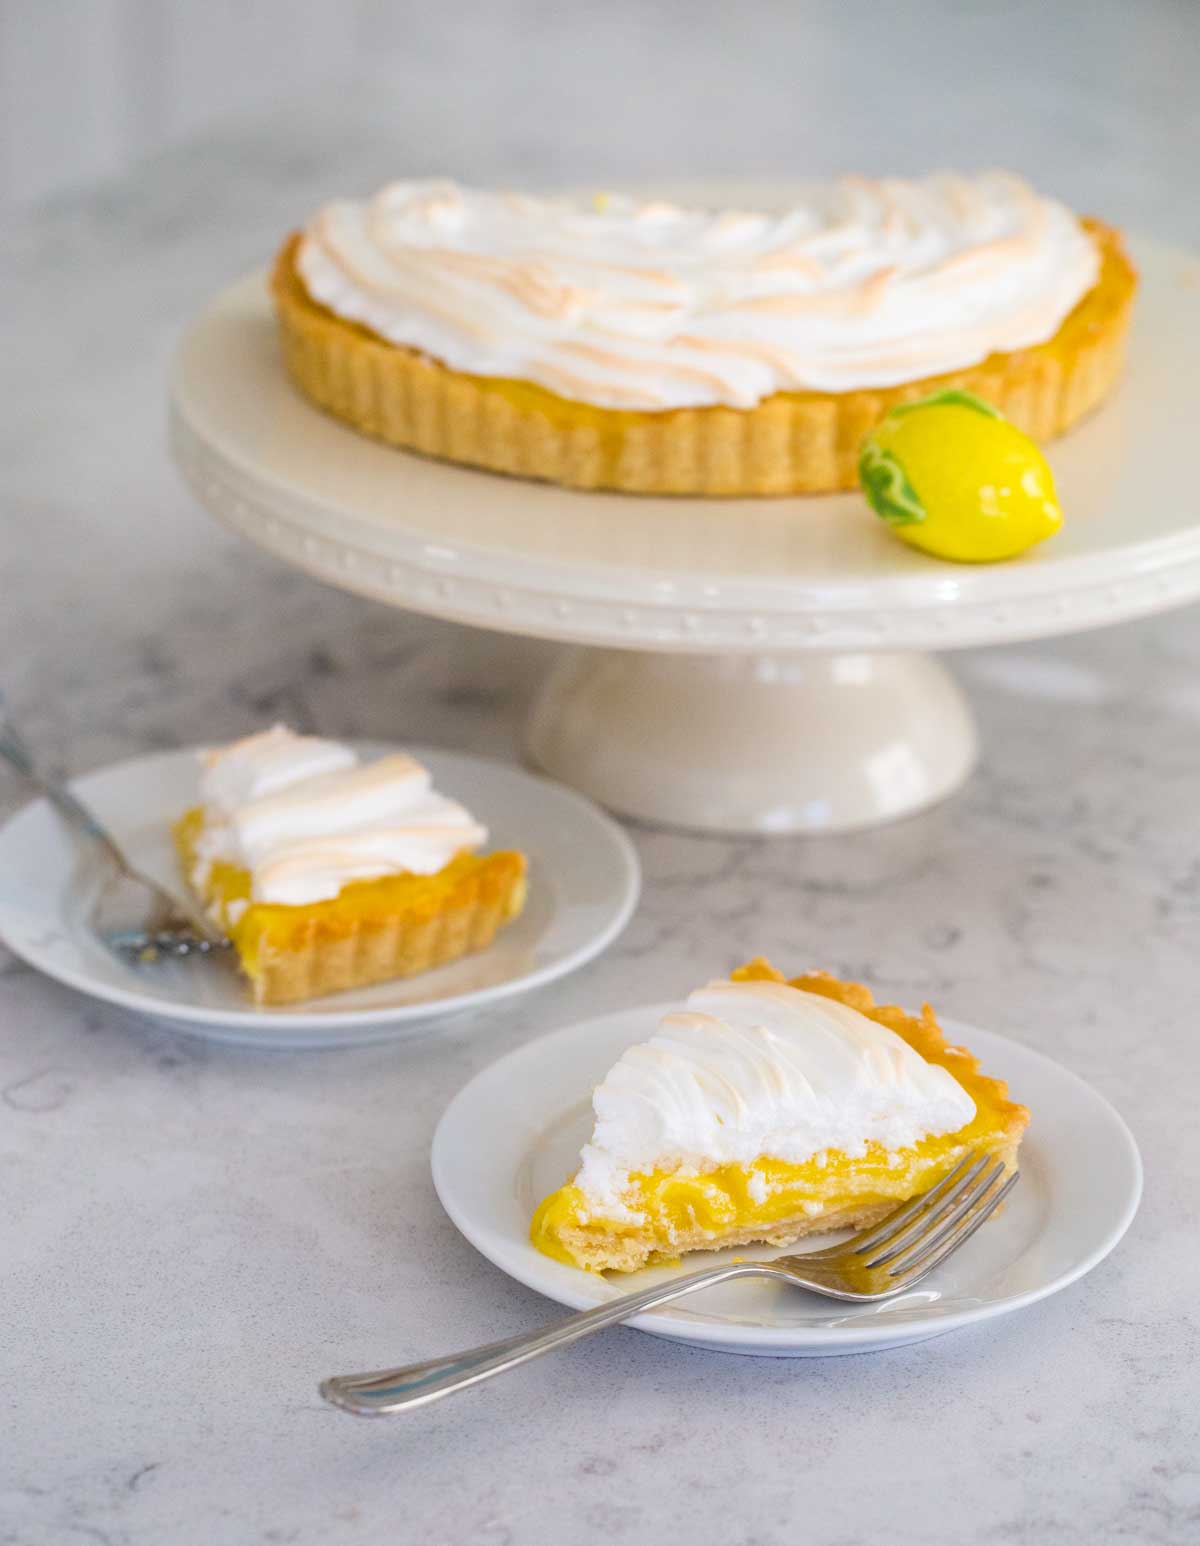 The finished lemon meringue tart is on a cake plate with two slices on smaller plates for serving.